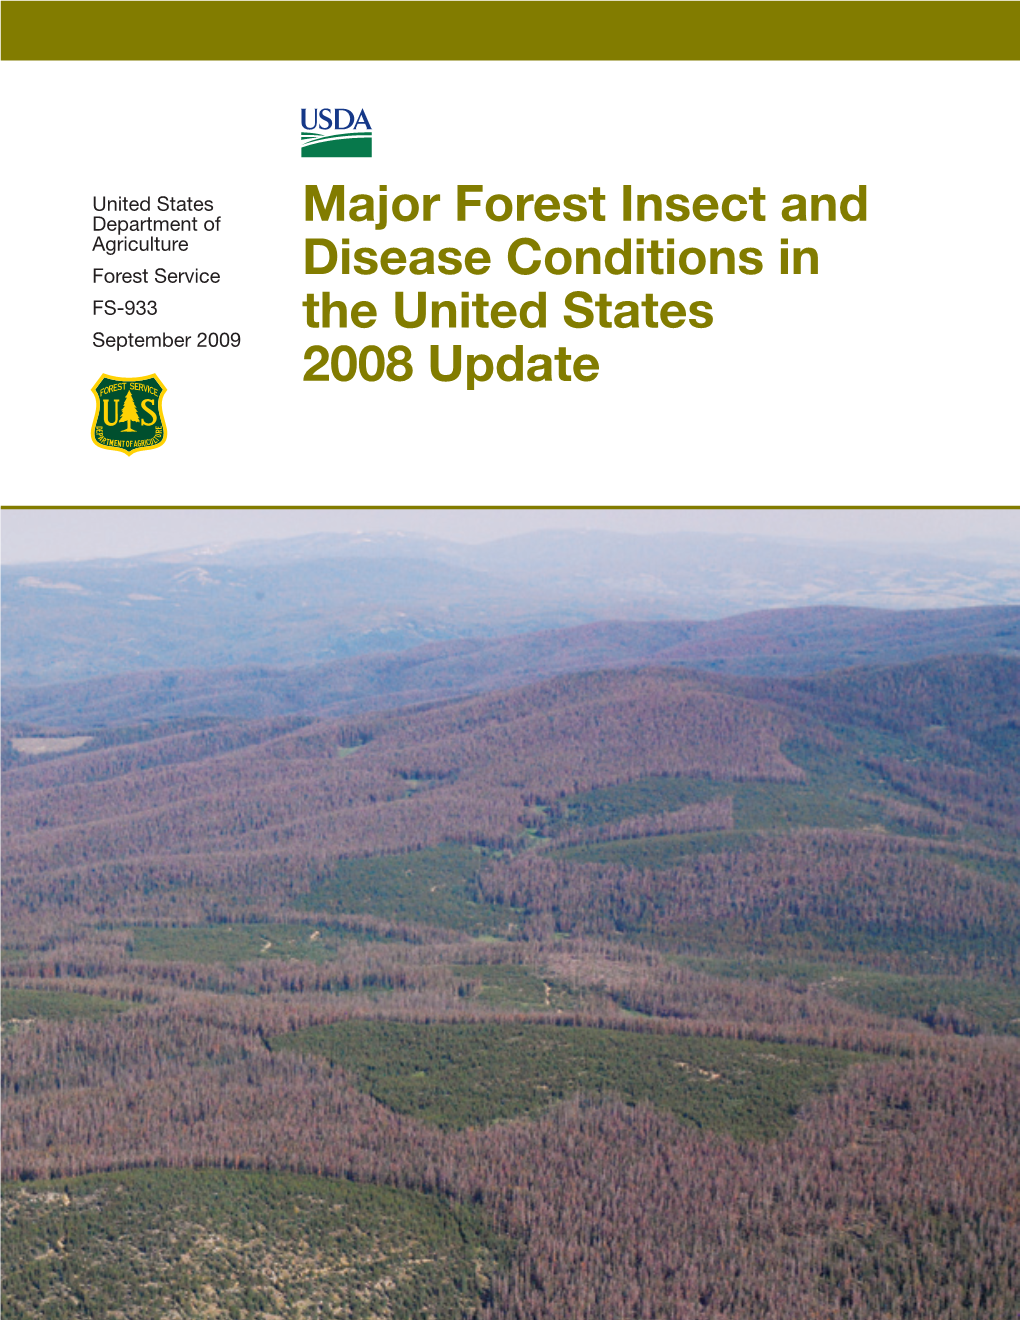 Major Forest Insect and Disease Conditions in the United States